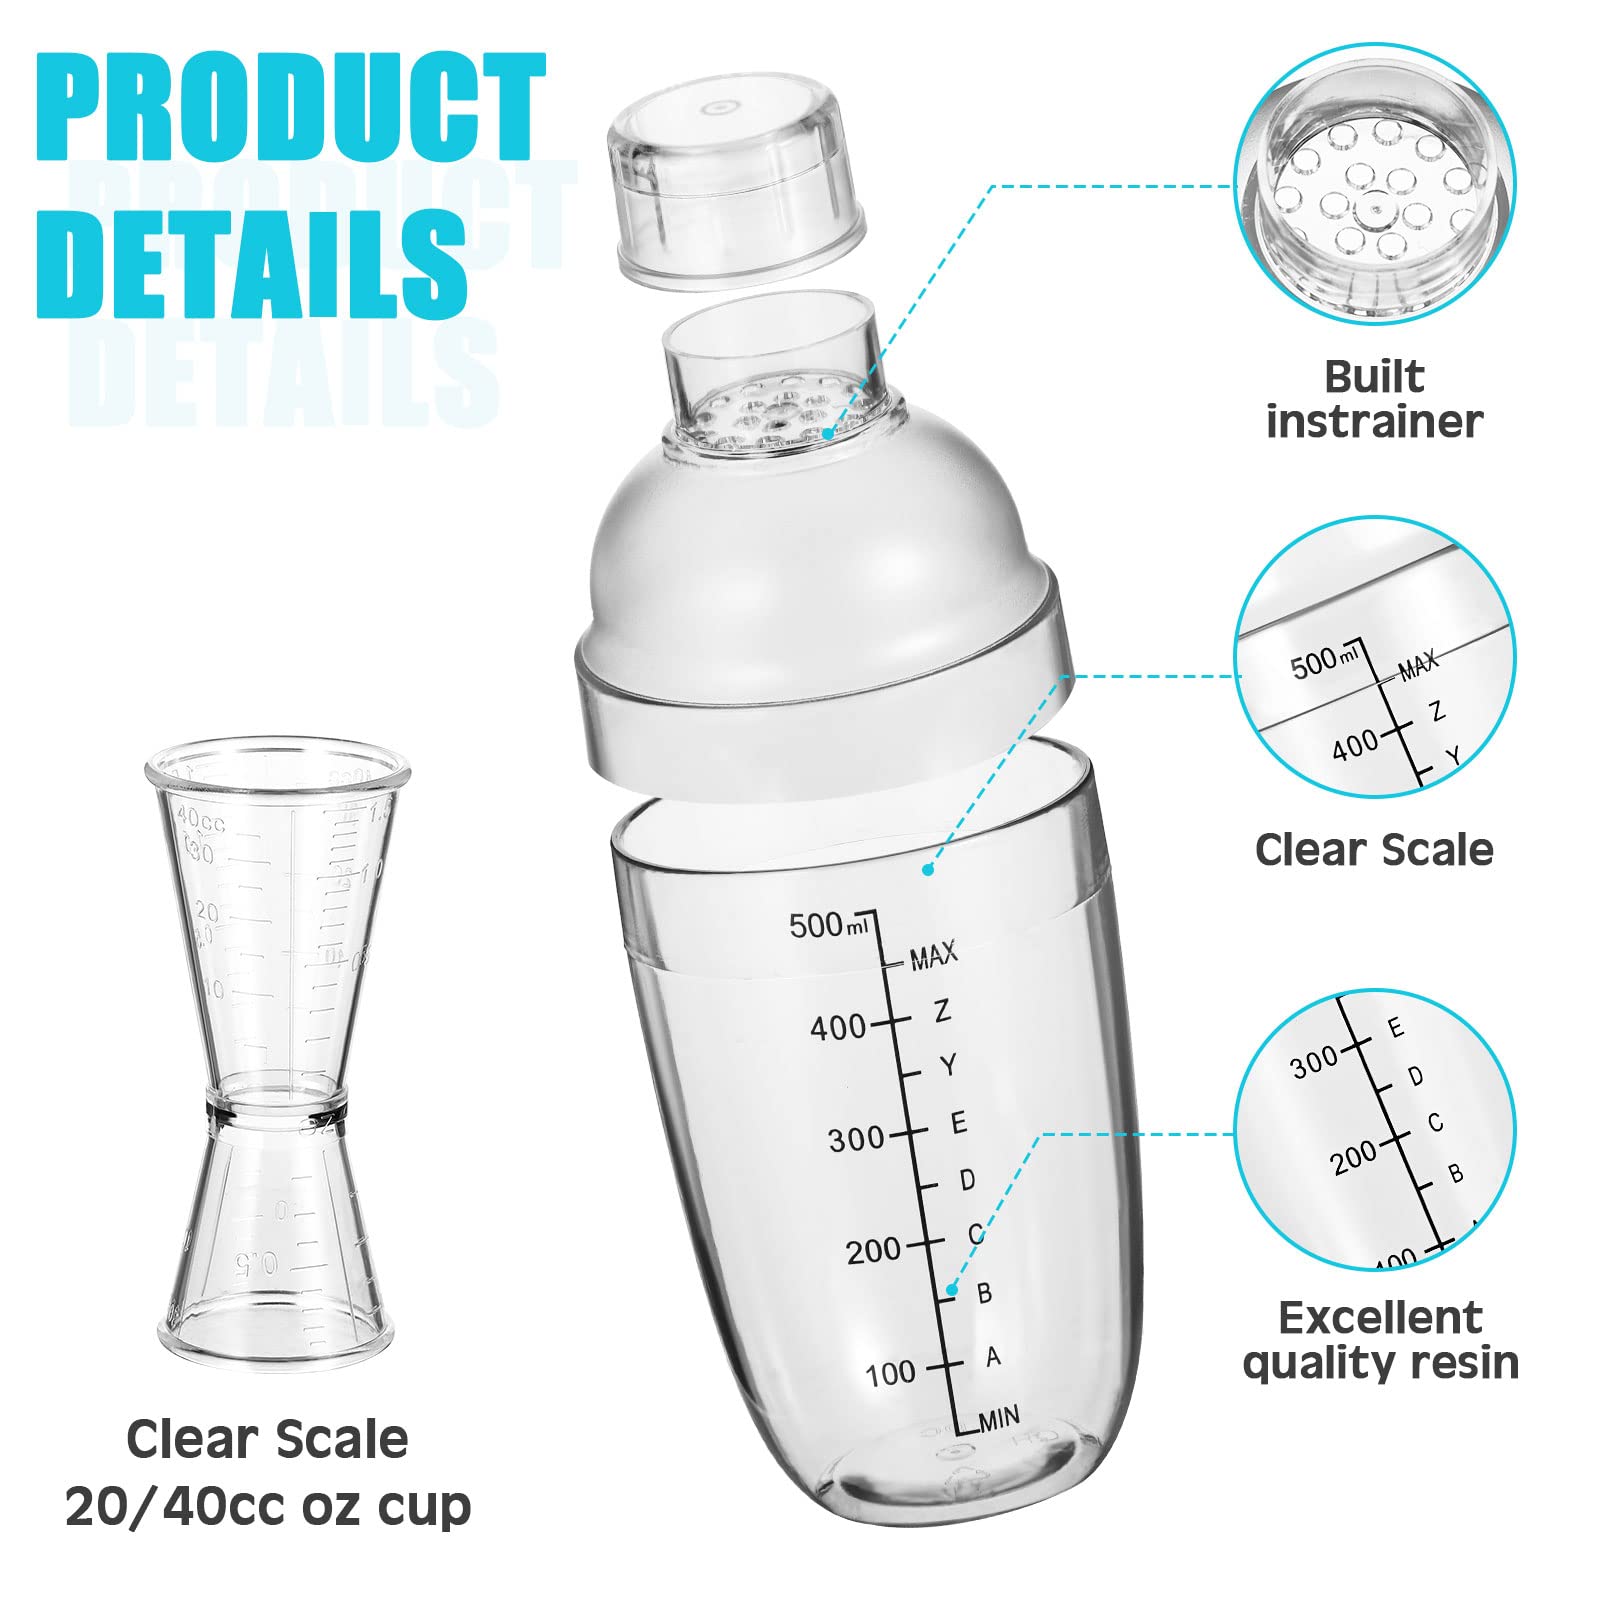 7 Pcs Plastic Cocktail Shaker Set Drink Mixer with Mark Clear Drink Shaker Cocktail Shaker and Measuring Jigger Set Ounce Cup Clear Bar Set for Bar Party Home Use Wine Shaker Bar Mixing Tool